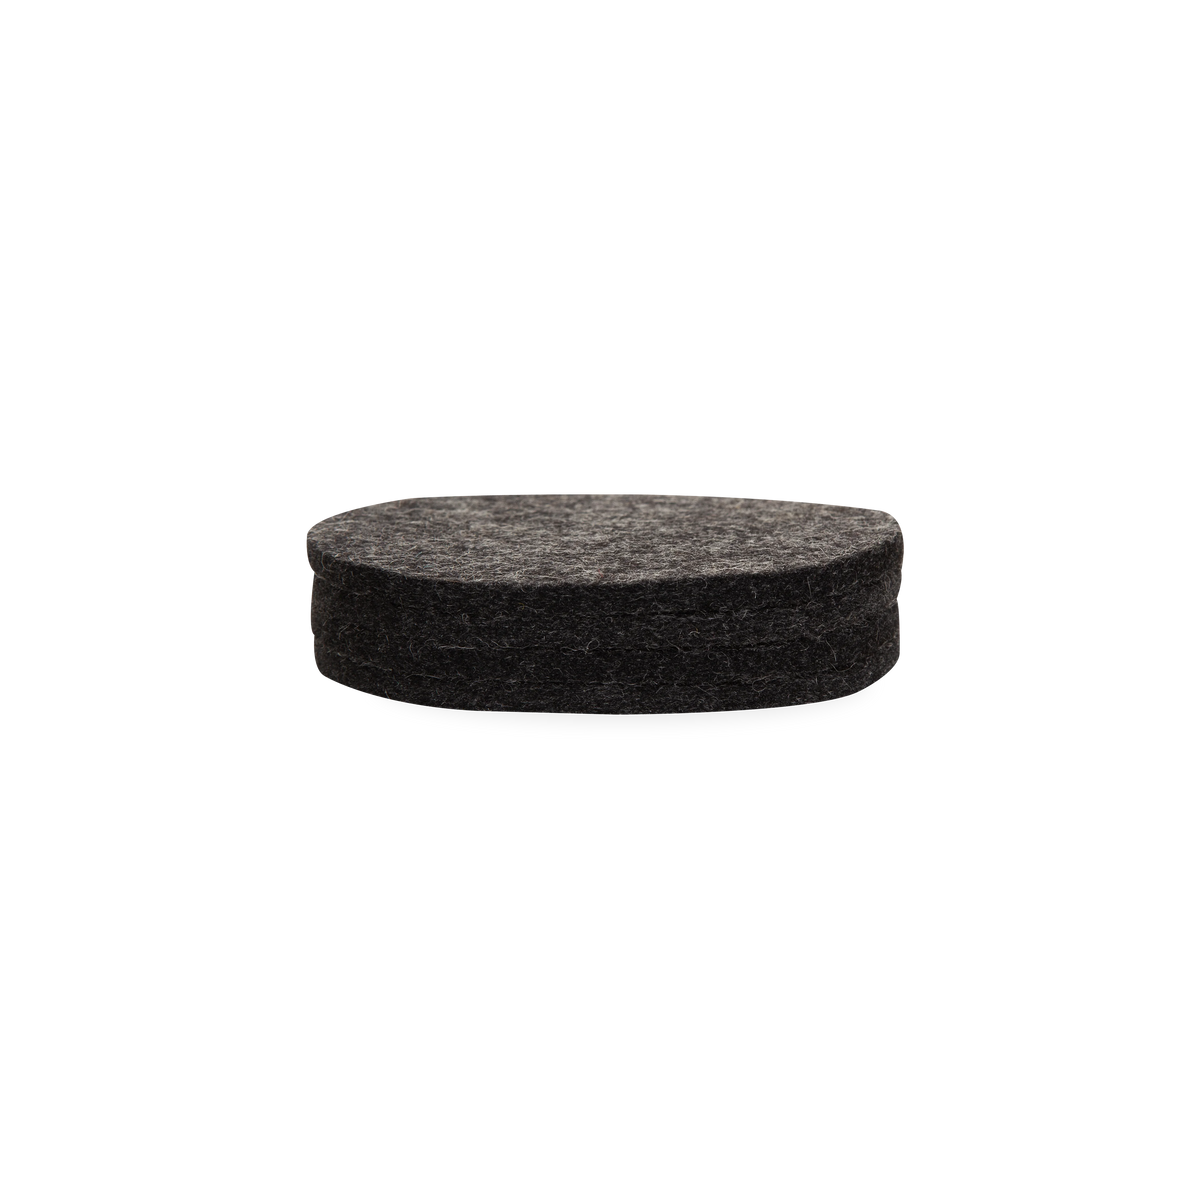 Made from the highest quality German merino wool, these Round Felt Coasters have a minimalist design that focuses on functional material.